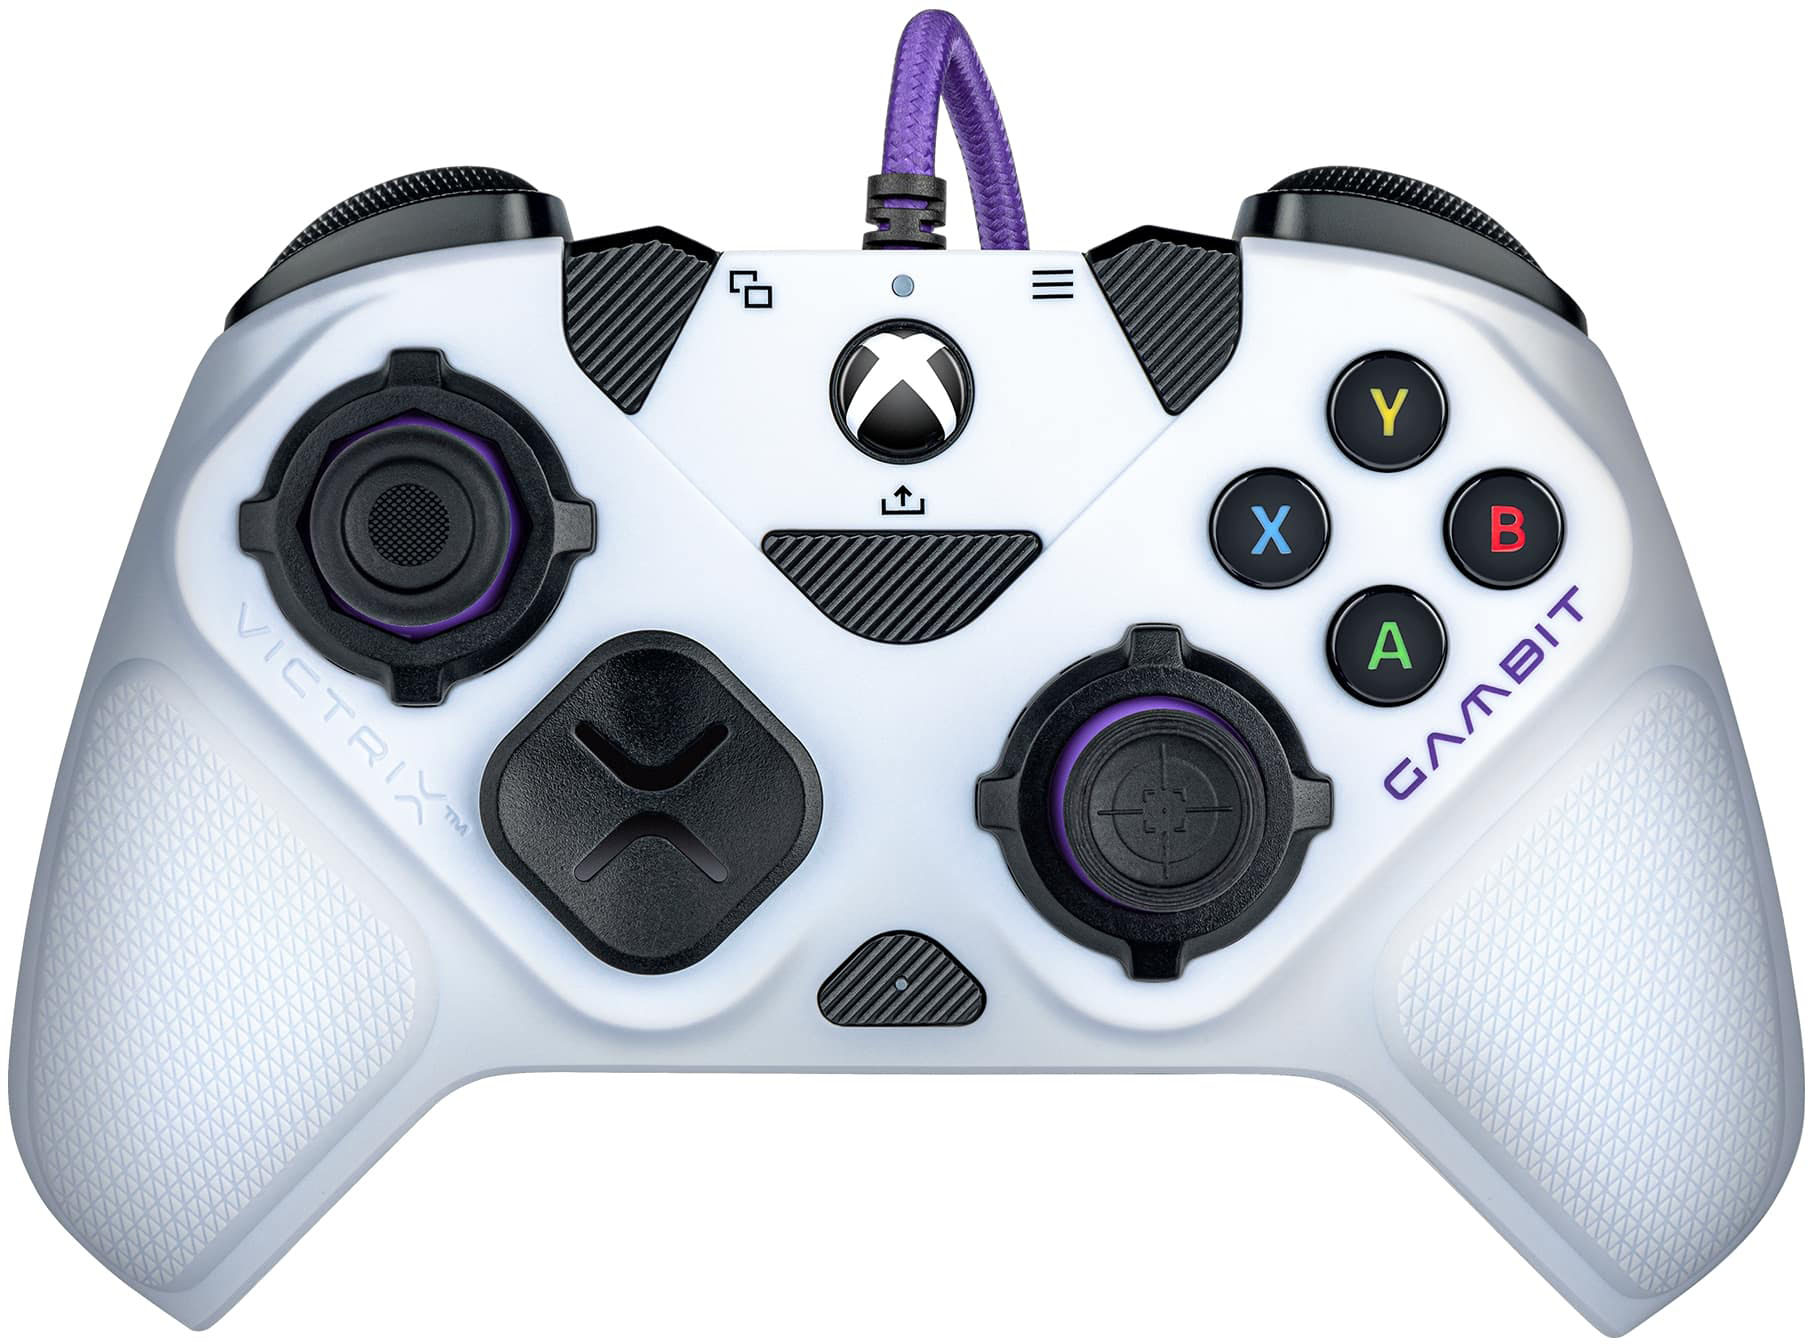 0708056067267 - VICTRIX GAMBIT WORLDS FASTEST XBOX CONTROLLER - XBOX ONE, SERIES X|S, PC - ELITE ESPORTS DESIGN WITH SWAPPABLE PRO THUMBSTICKS, CUSTOM PADDLES, ADJUSTABLE COMPETITION TRIGGERS, WHITE / PURPLE SKINS